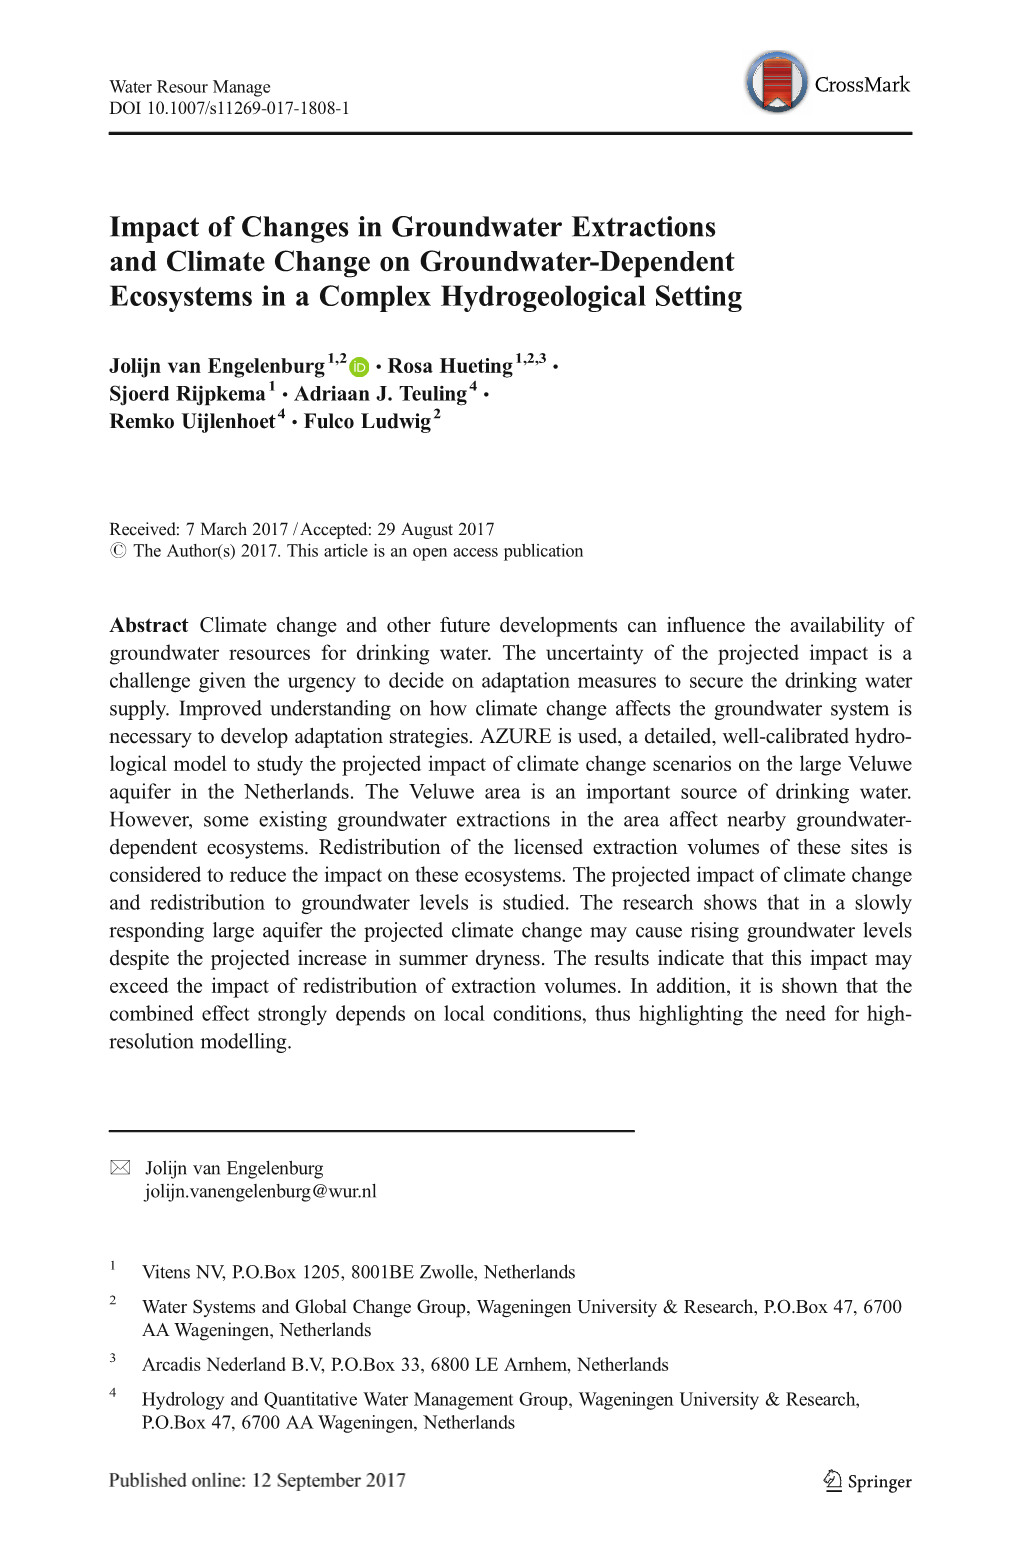 Impact of Changes in Groundwater Extractions and Climate Change on Groundwater-Dependent Ecosystems in a Complex Hydrogeological Setting